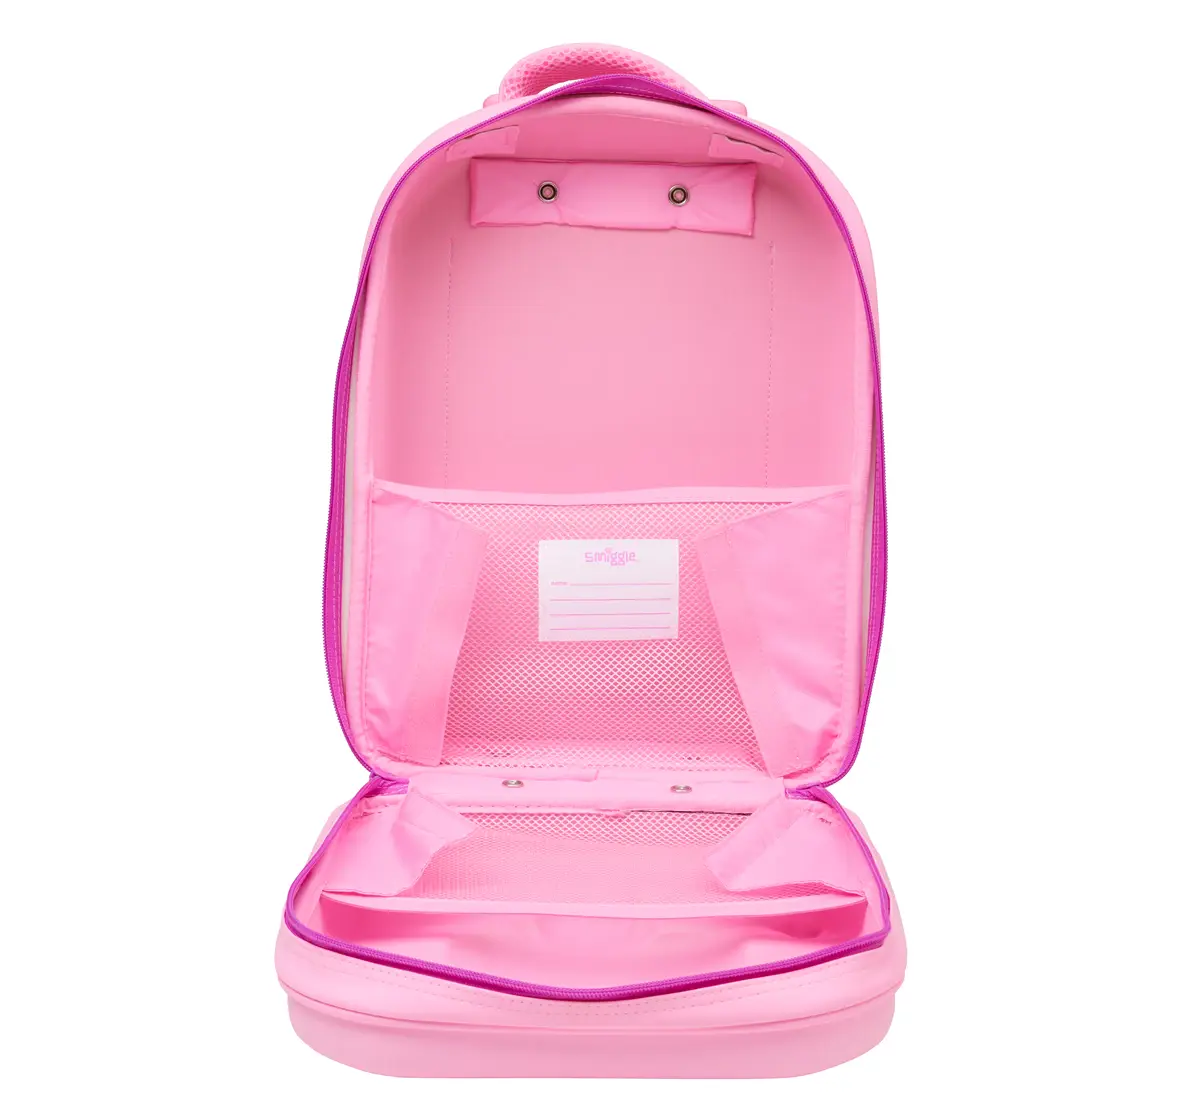 Smiggle Movin' Junior Trolley Bag With Hard Top, Pink, 3Y+